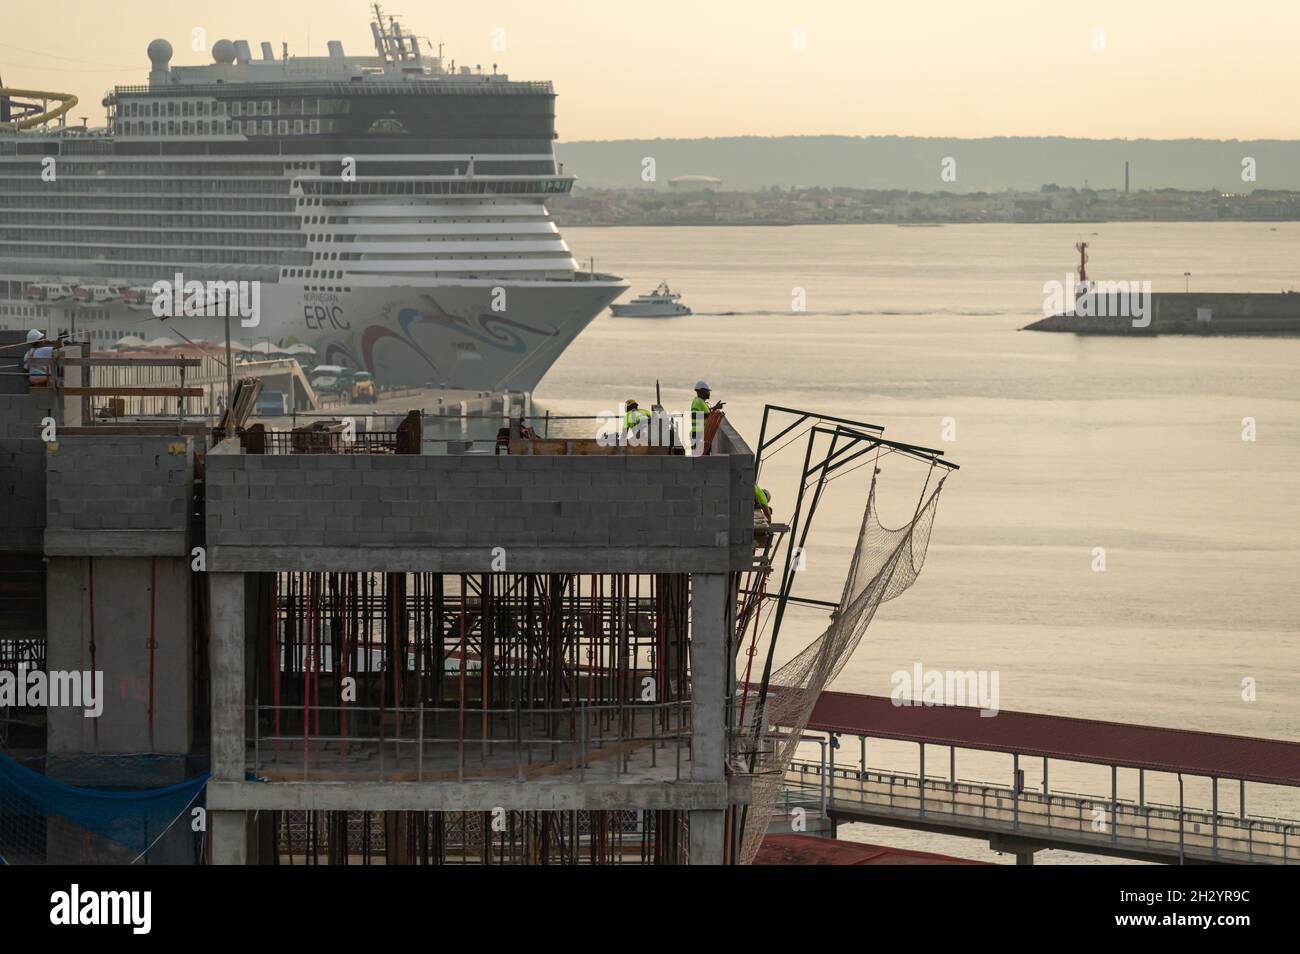 Palma de Mallorca, Balearic Islands, Spain - 09 13 2021: Residential building under construction in Palma port with a cruise ship on the background Stock Photo